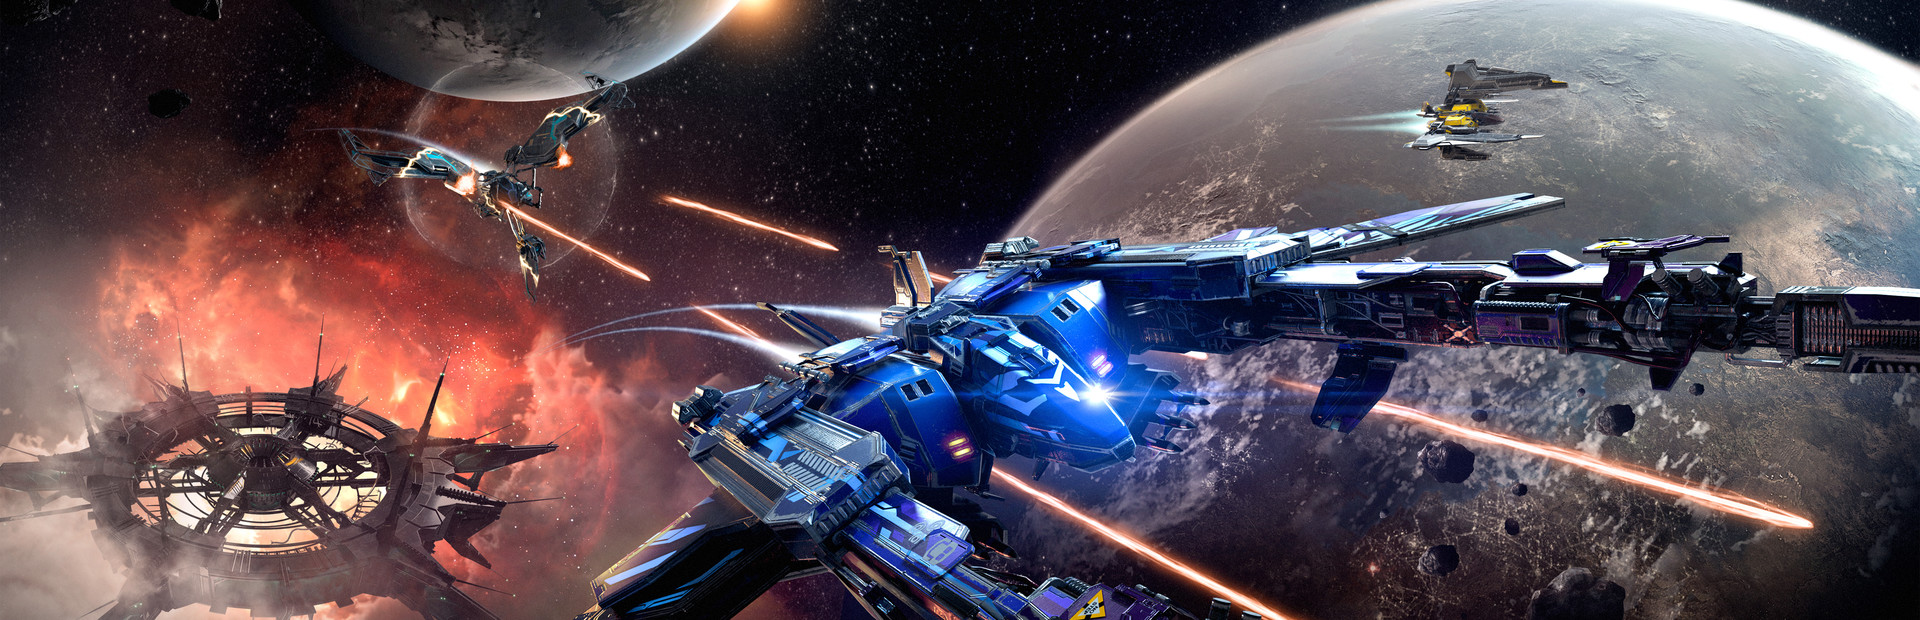 EVE: Valkyrie – Warzone cover image